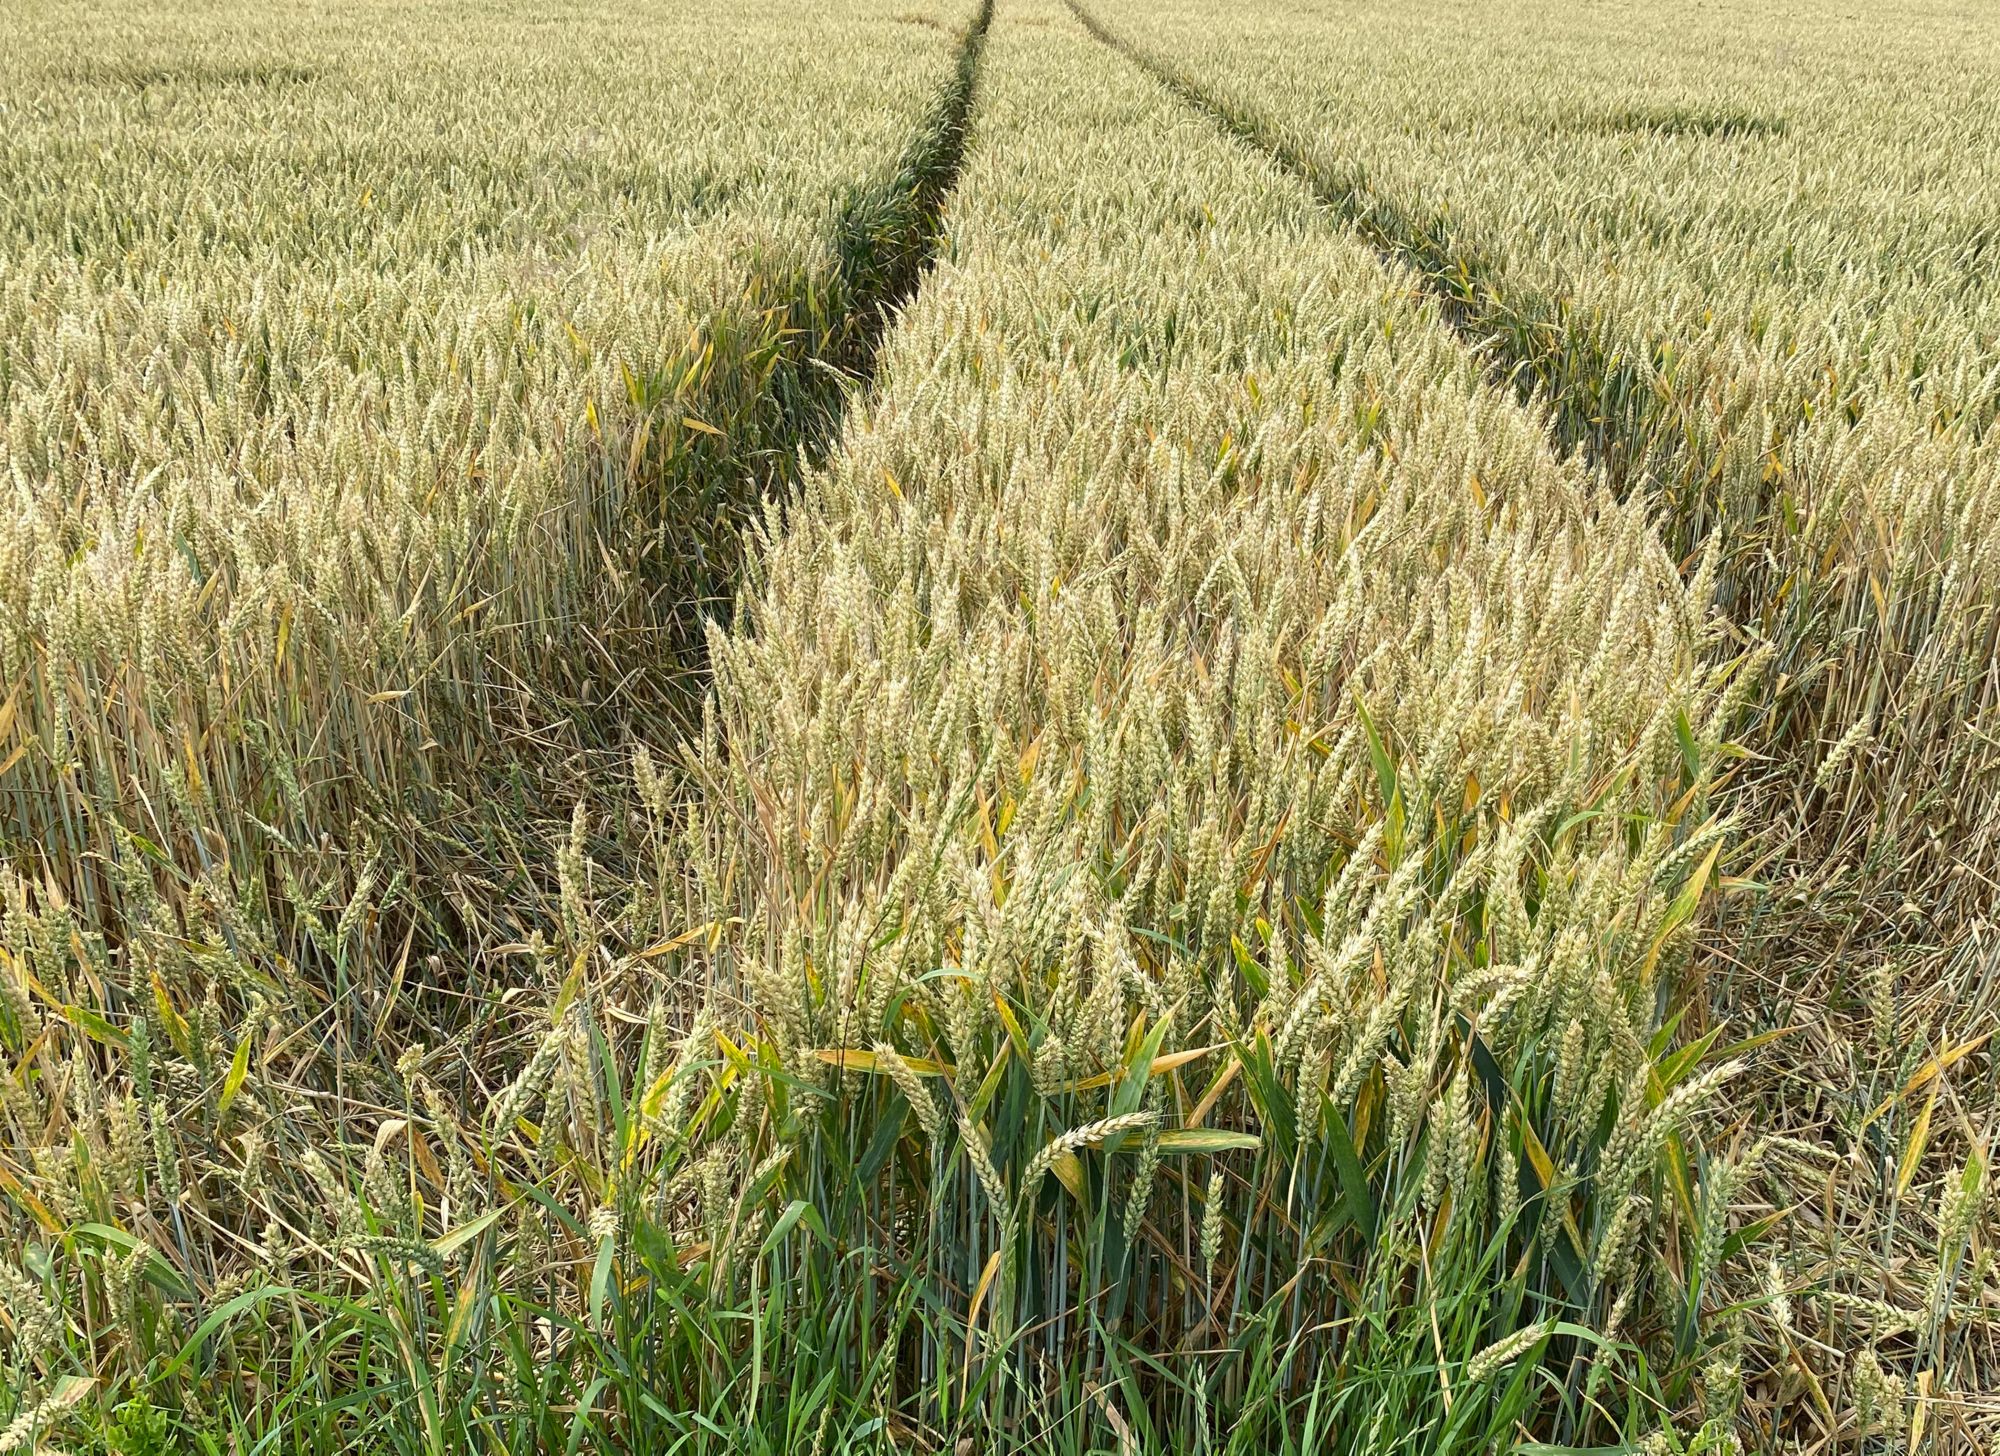 Strong, upright stems of even height are apparent on crops treated with a PGR. In contrast, the taller, weaker, untreated crop has suffered lodging. 